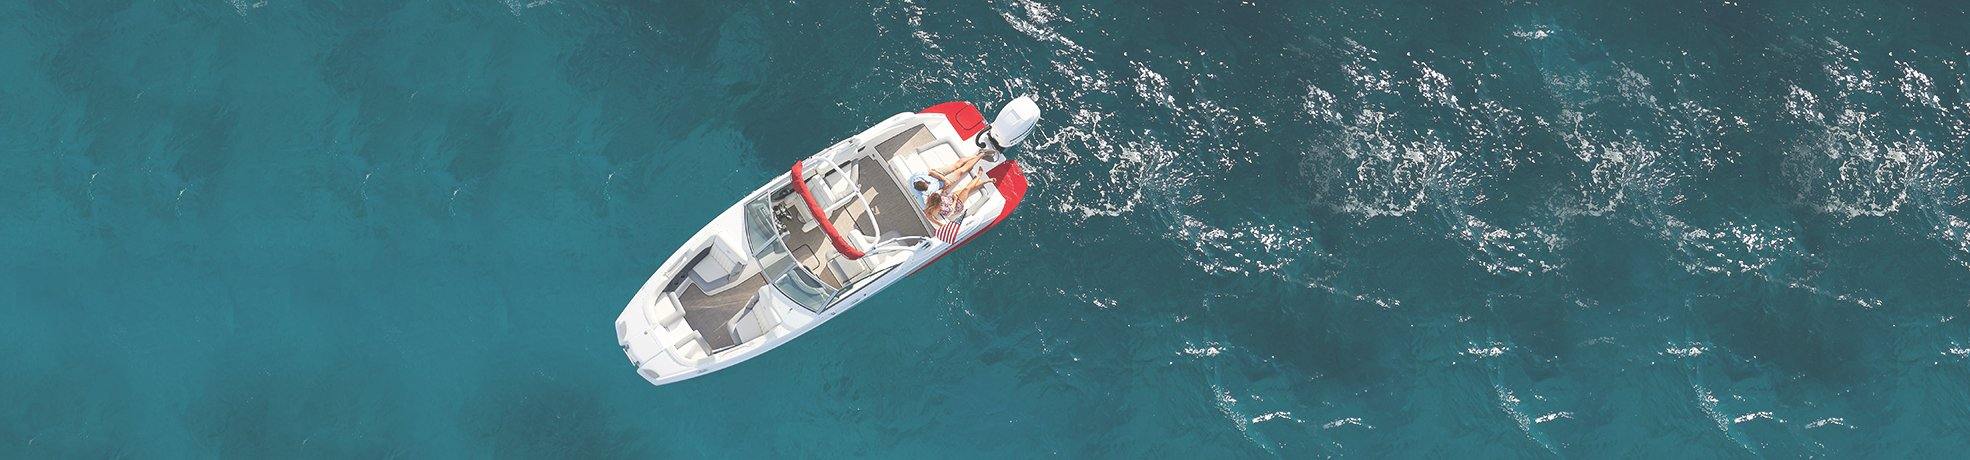 Marine Products & Accessories for Boats